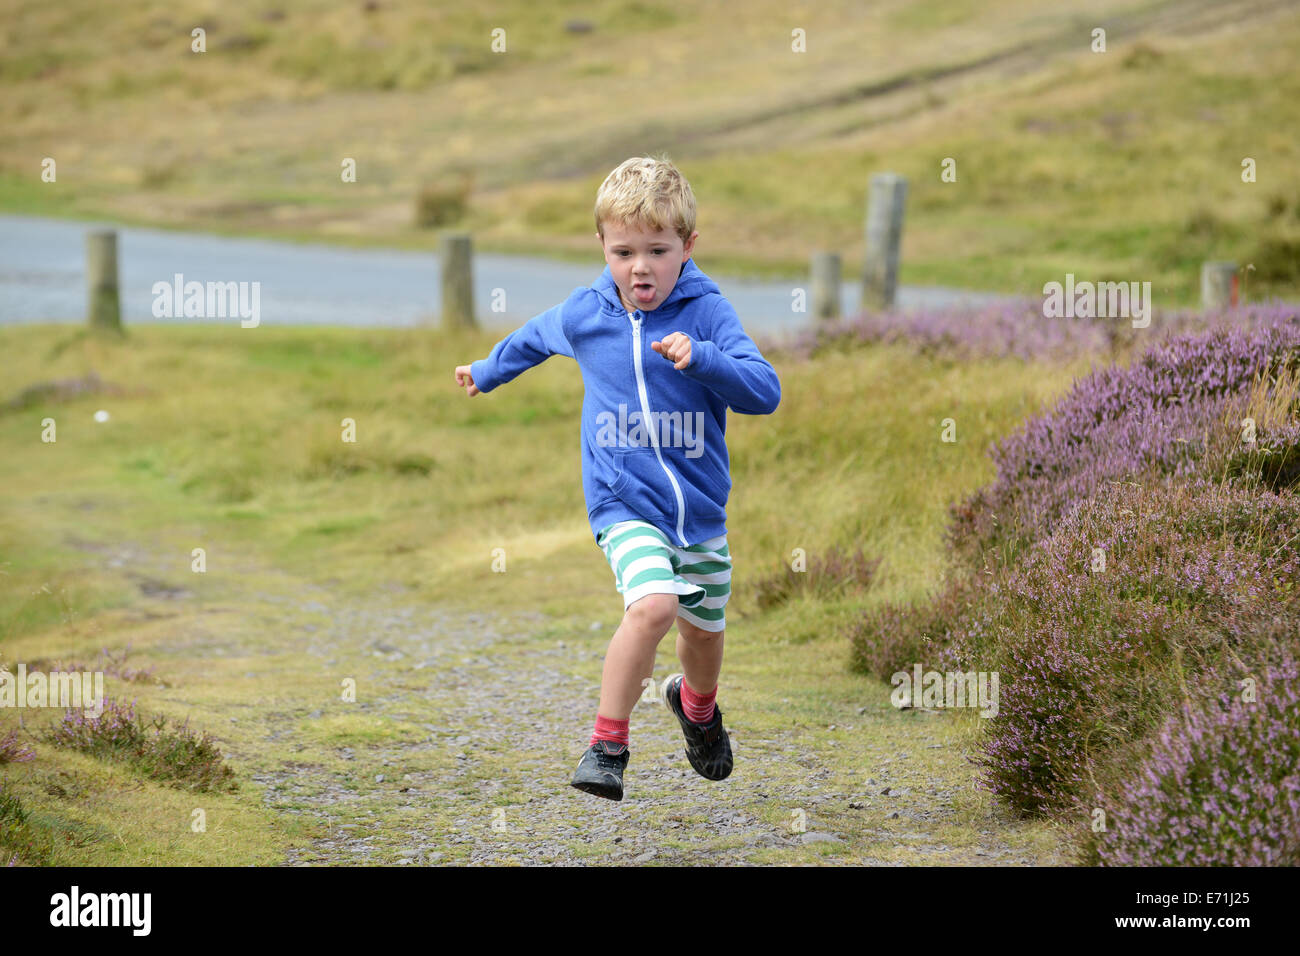 http://c8.alamy.com/comp/E71J25/young-boy-child-running-in-countryside-rural-area-uk-E71J25.jpg